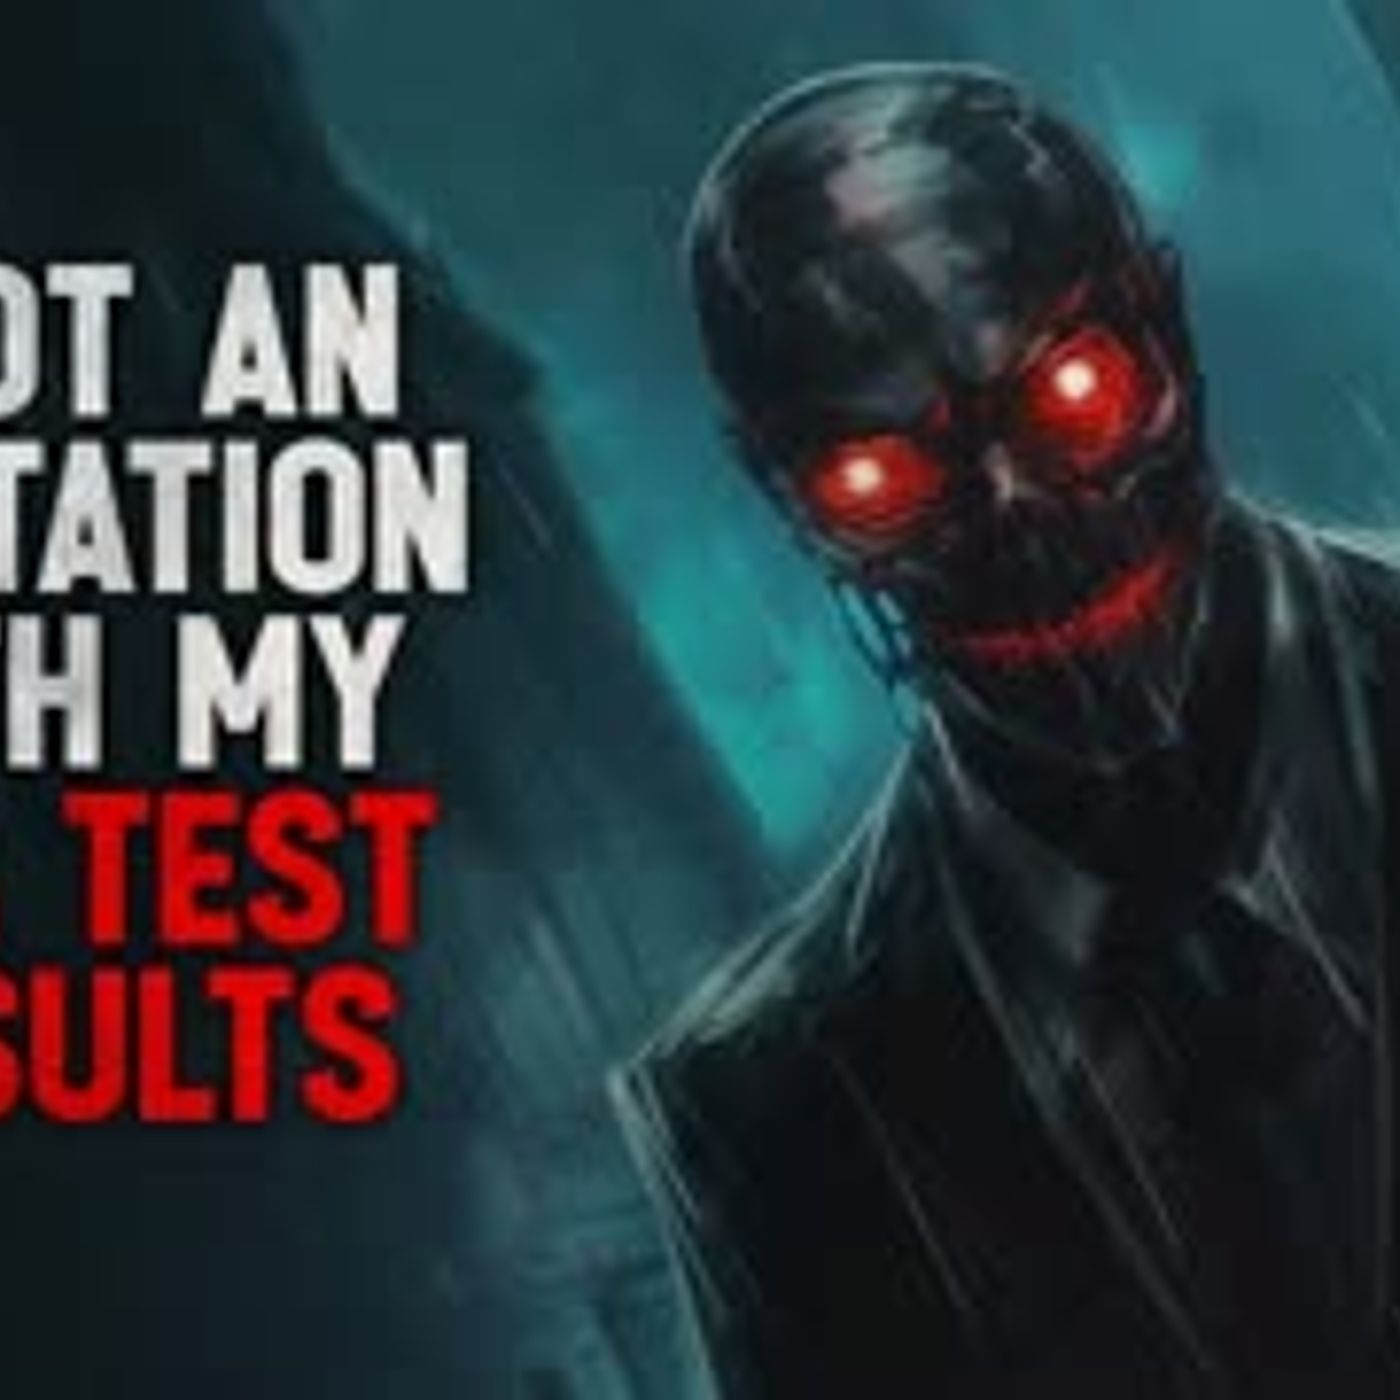 "I got an invitation with my DNA test results" Creepypasta